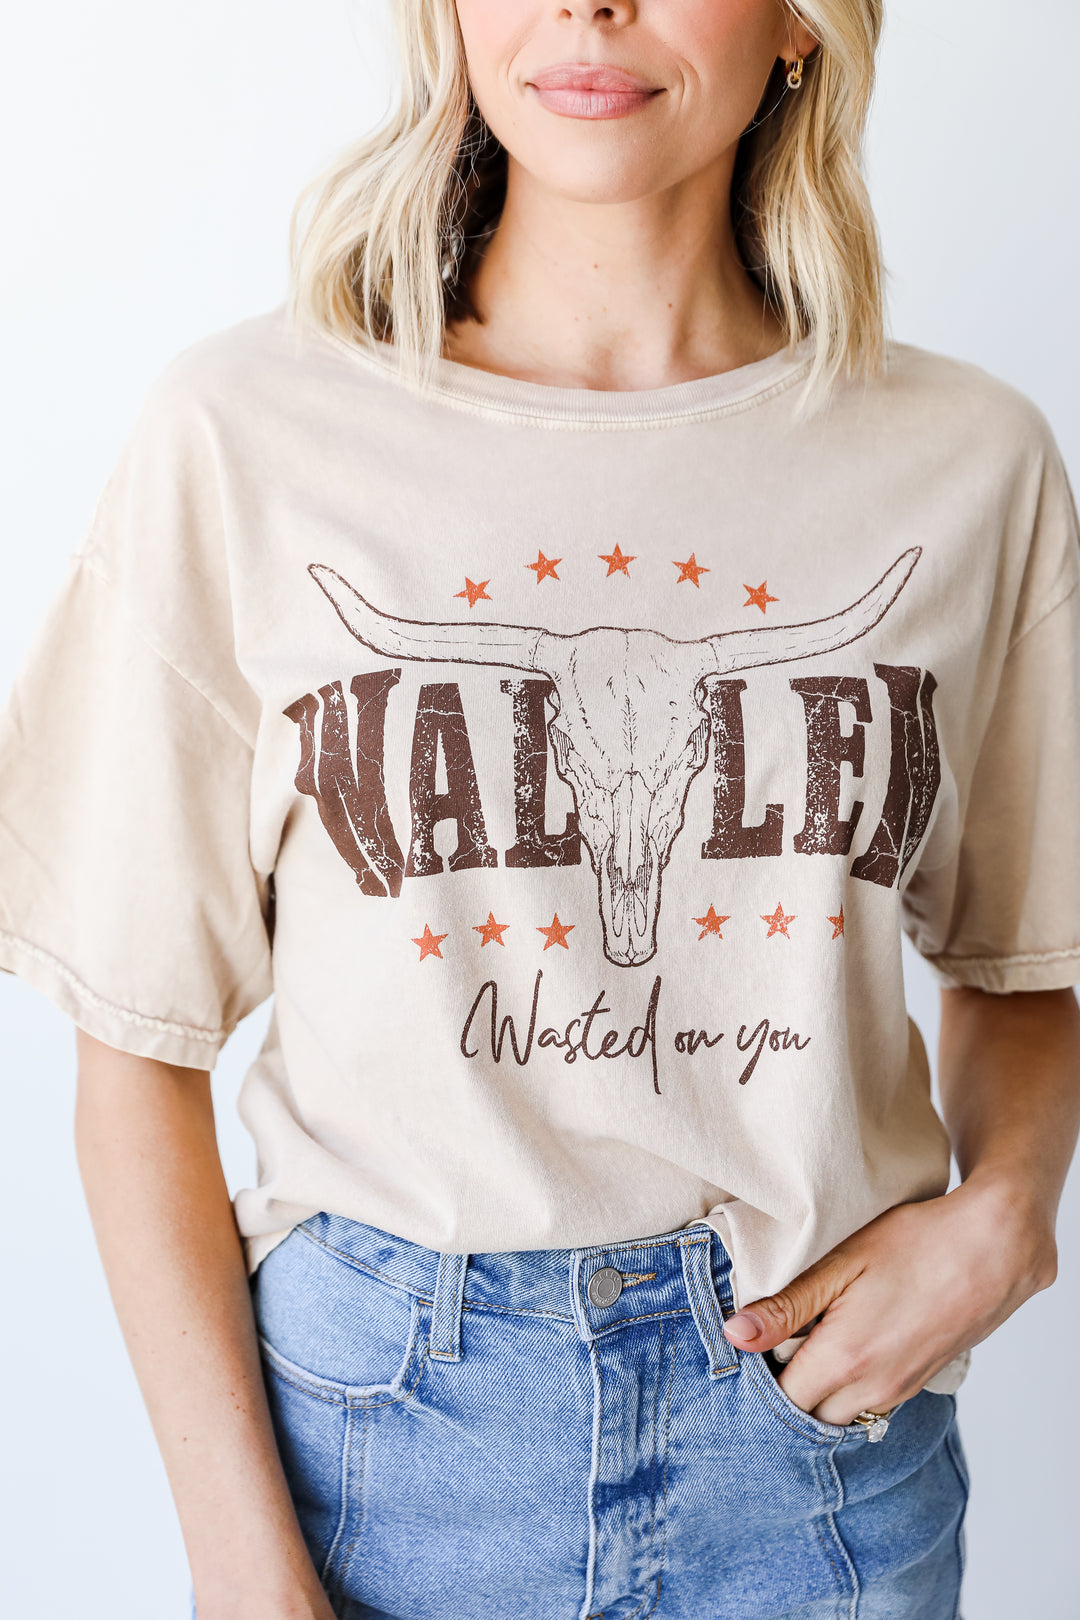 stone Wallen Wasted On You Cropped Graphic Tee on model